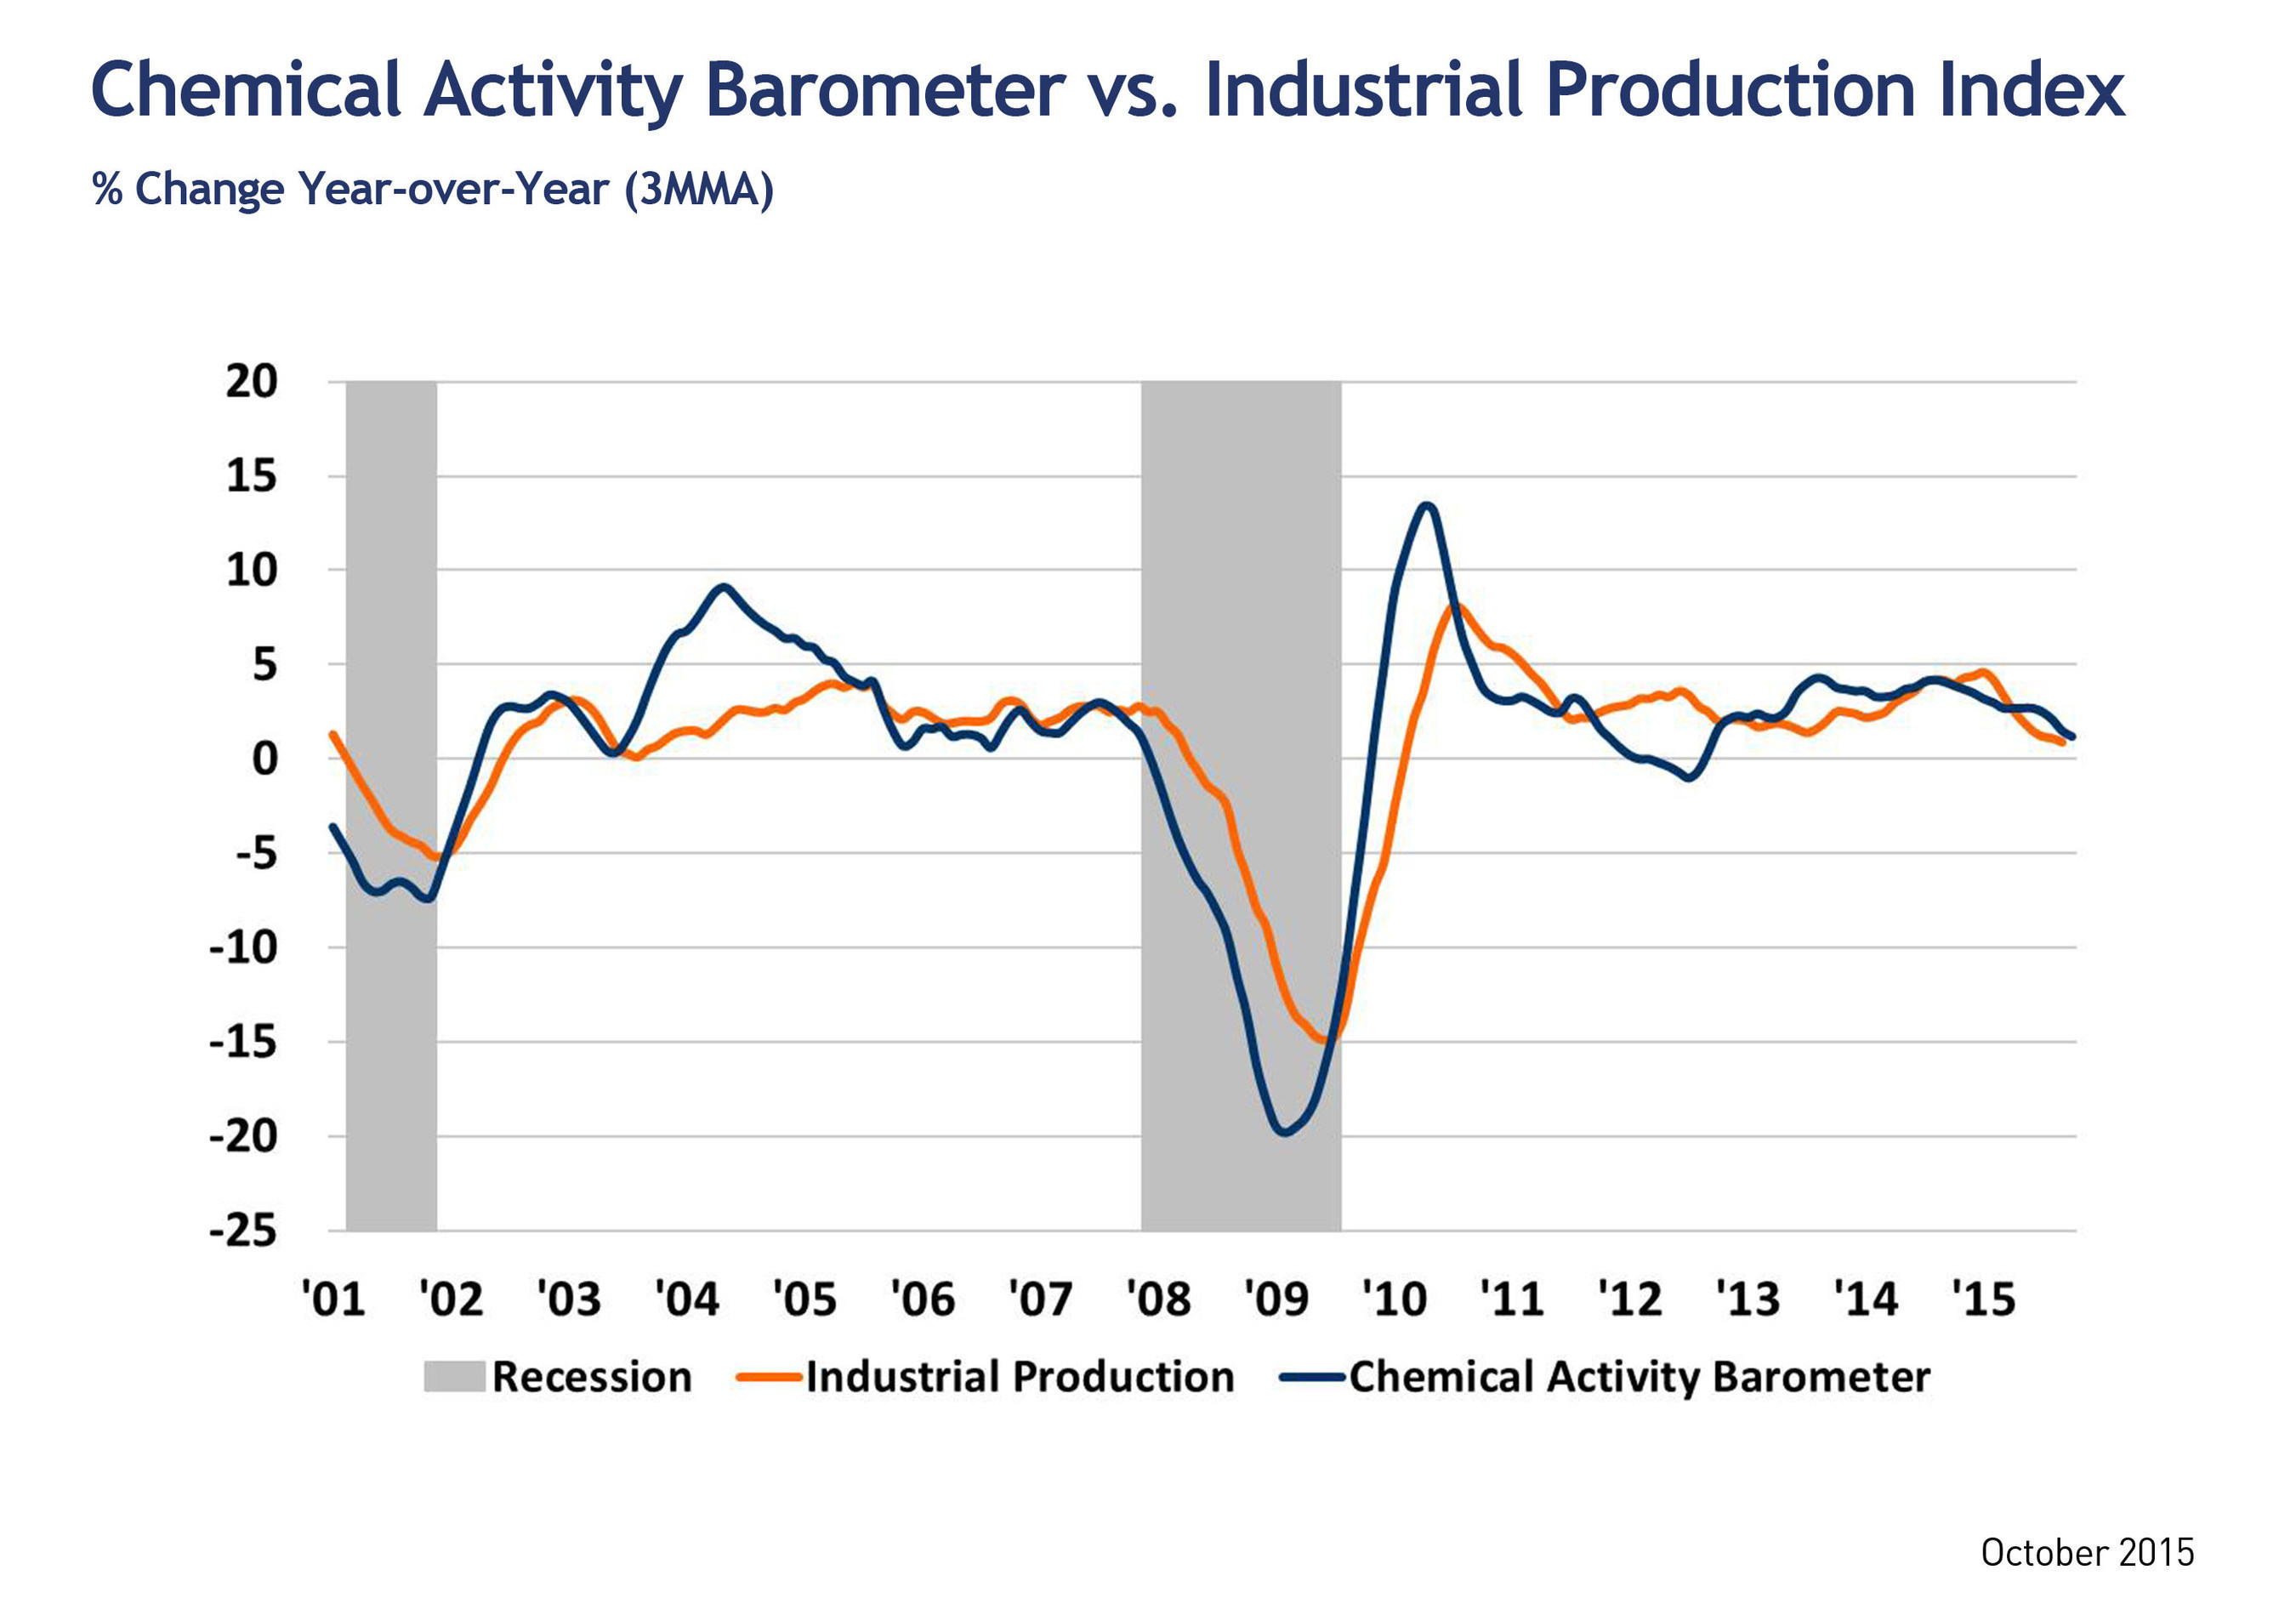 Chemical Activity Barometer Slides for Third Consecutive Month